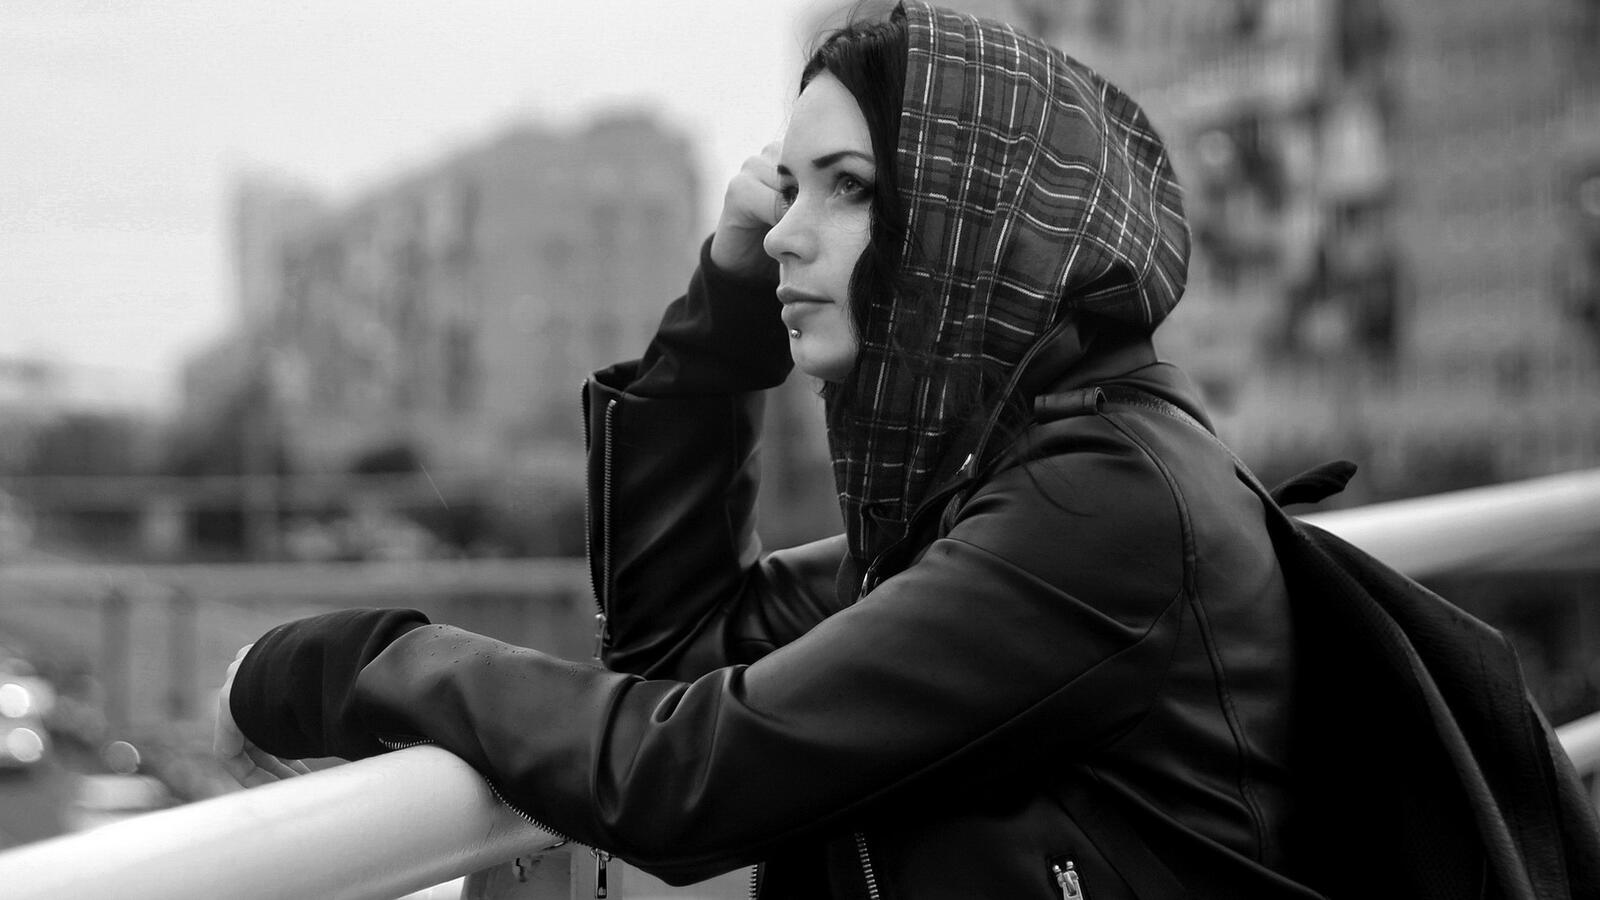 Free photo Katerina Baumgertner in the city in the rain black and white photo